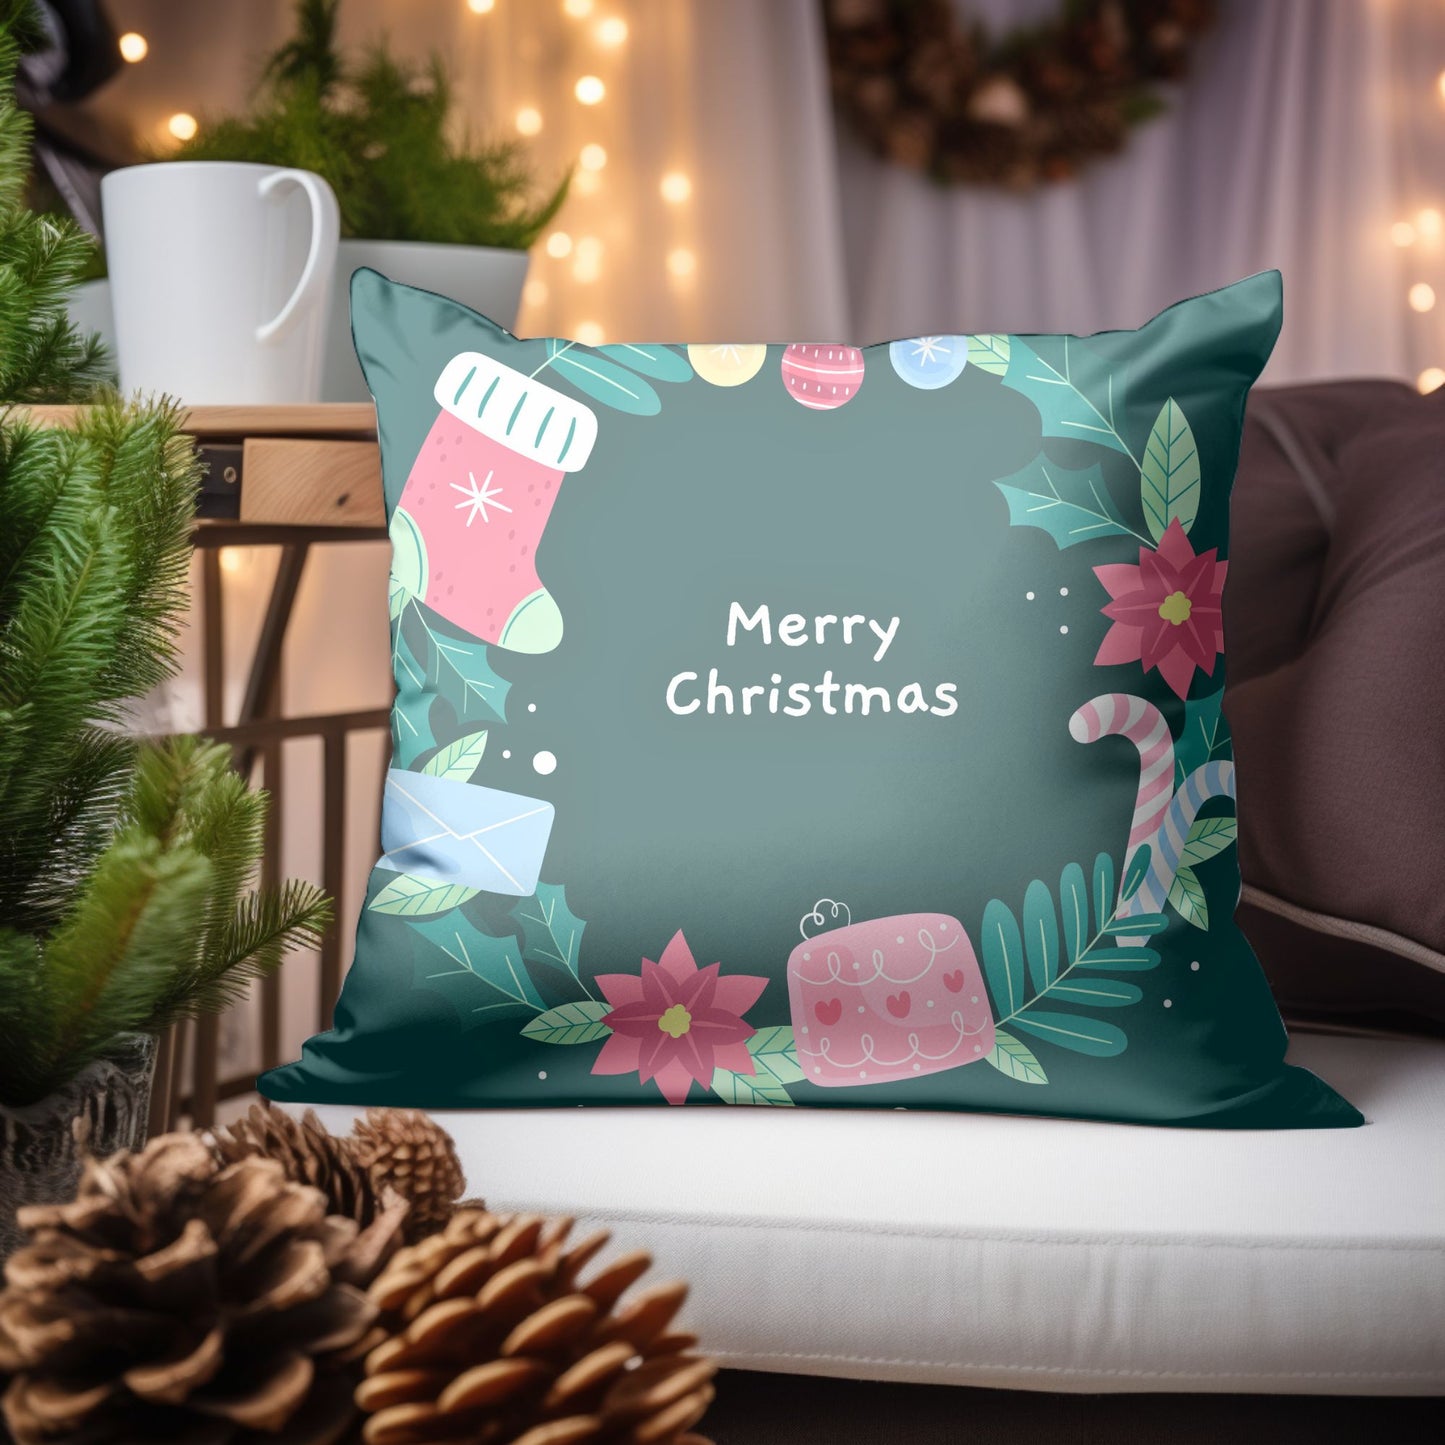 Merry Christmas-themed home decor pillow for welcoming ambiance